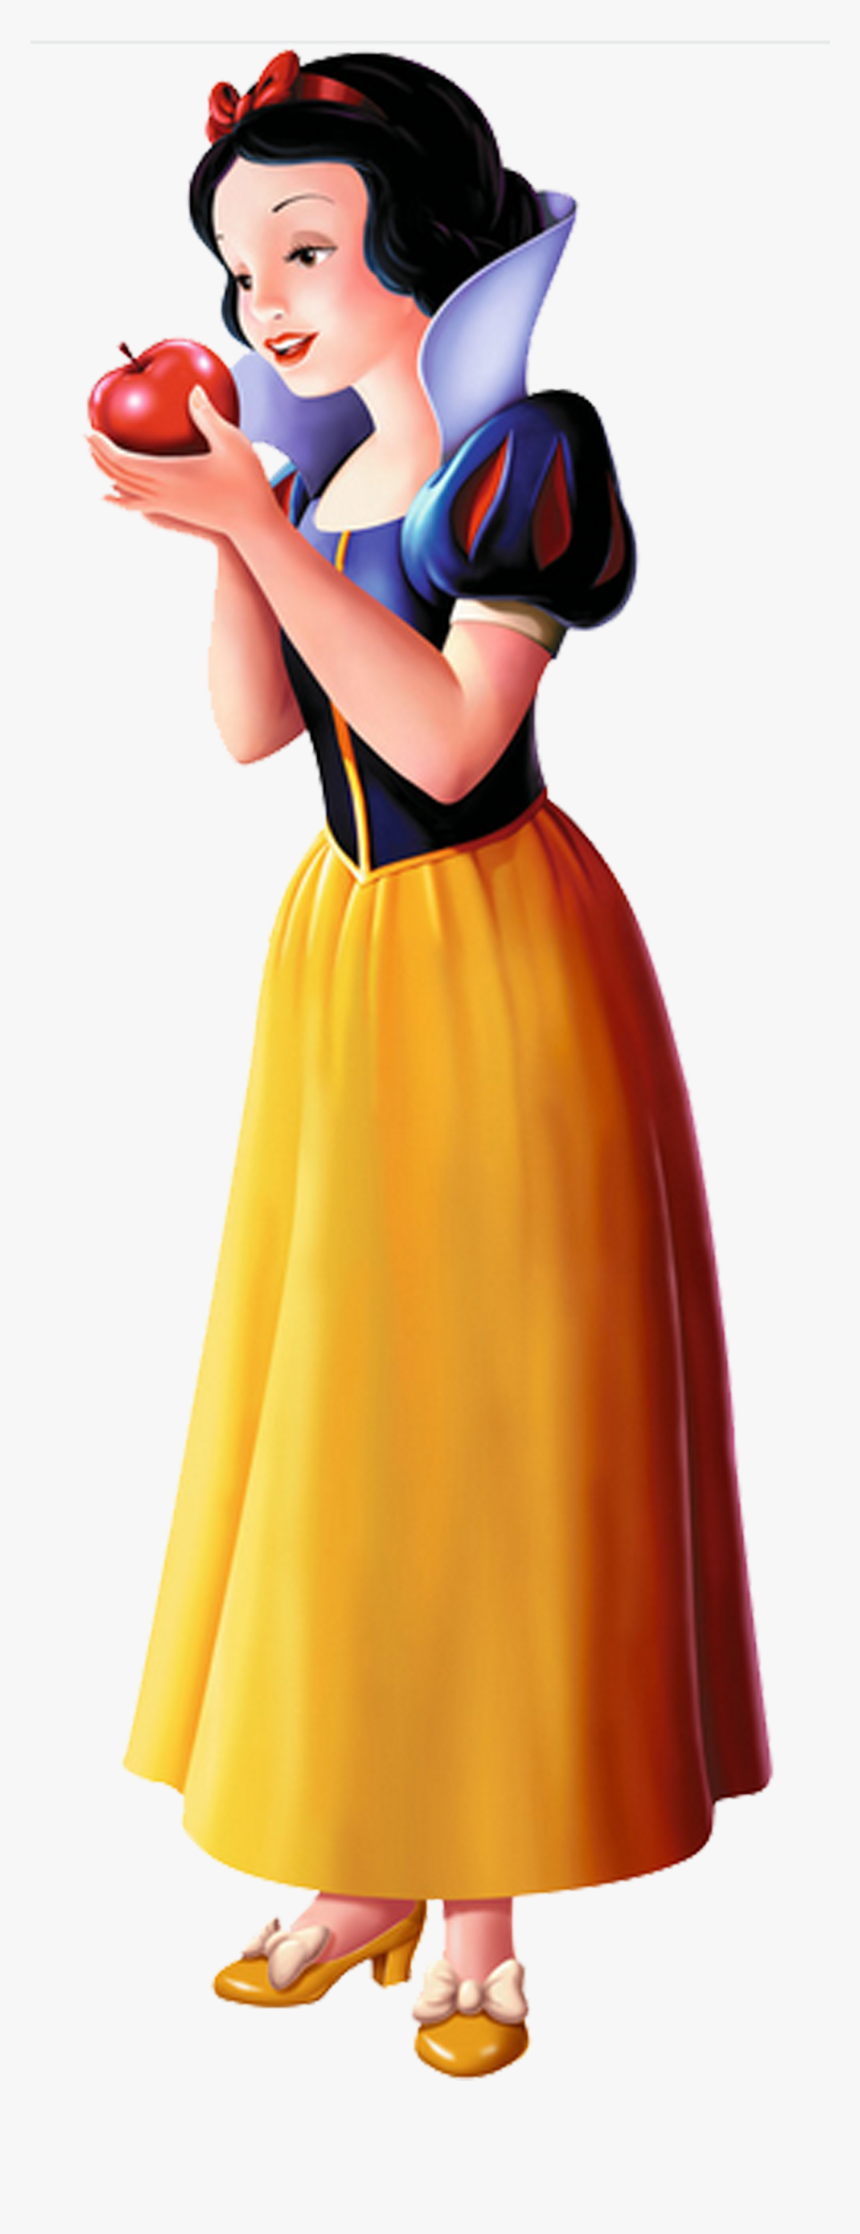 Snow White Title Disney Snow White With Apple Hd Png Download Kindpng